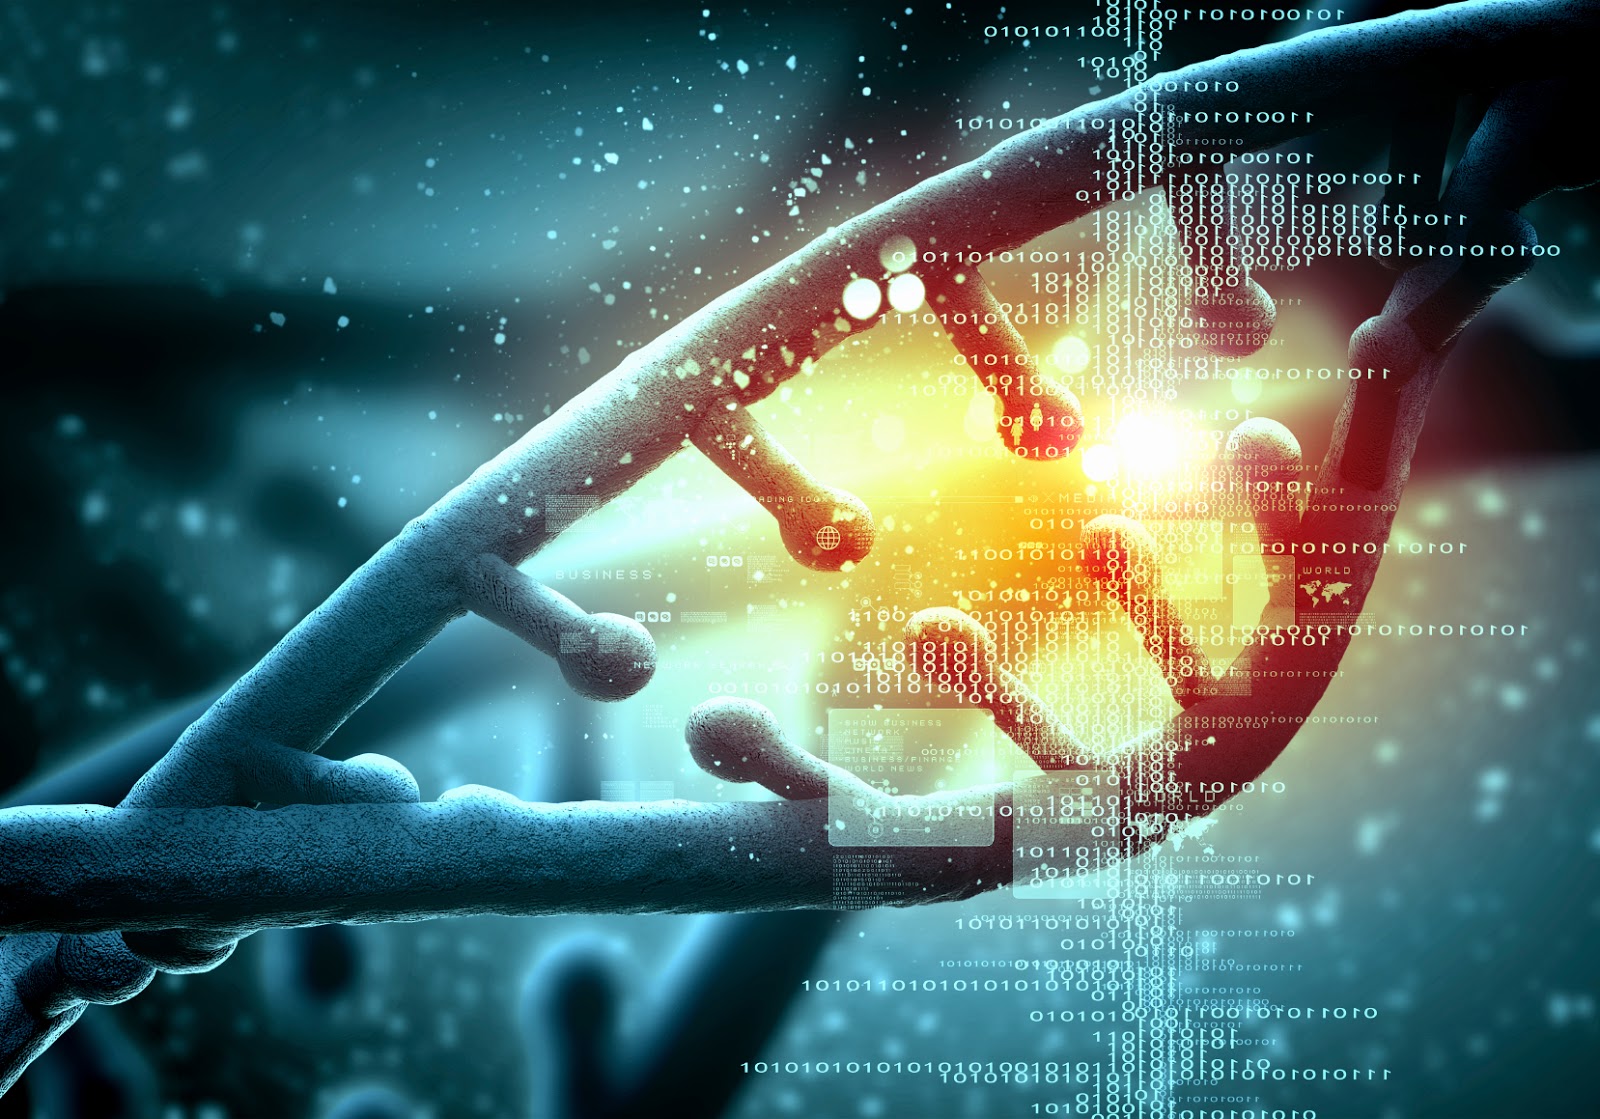 How DNA Activation Radically Changed My Life